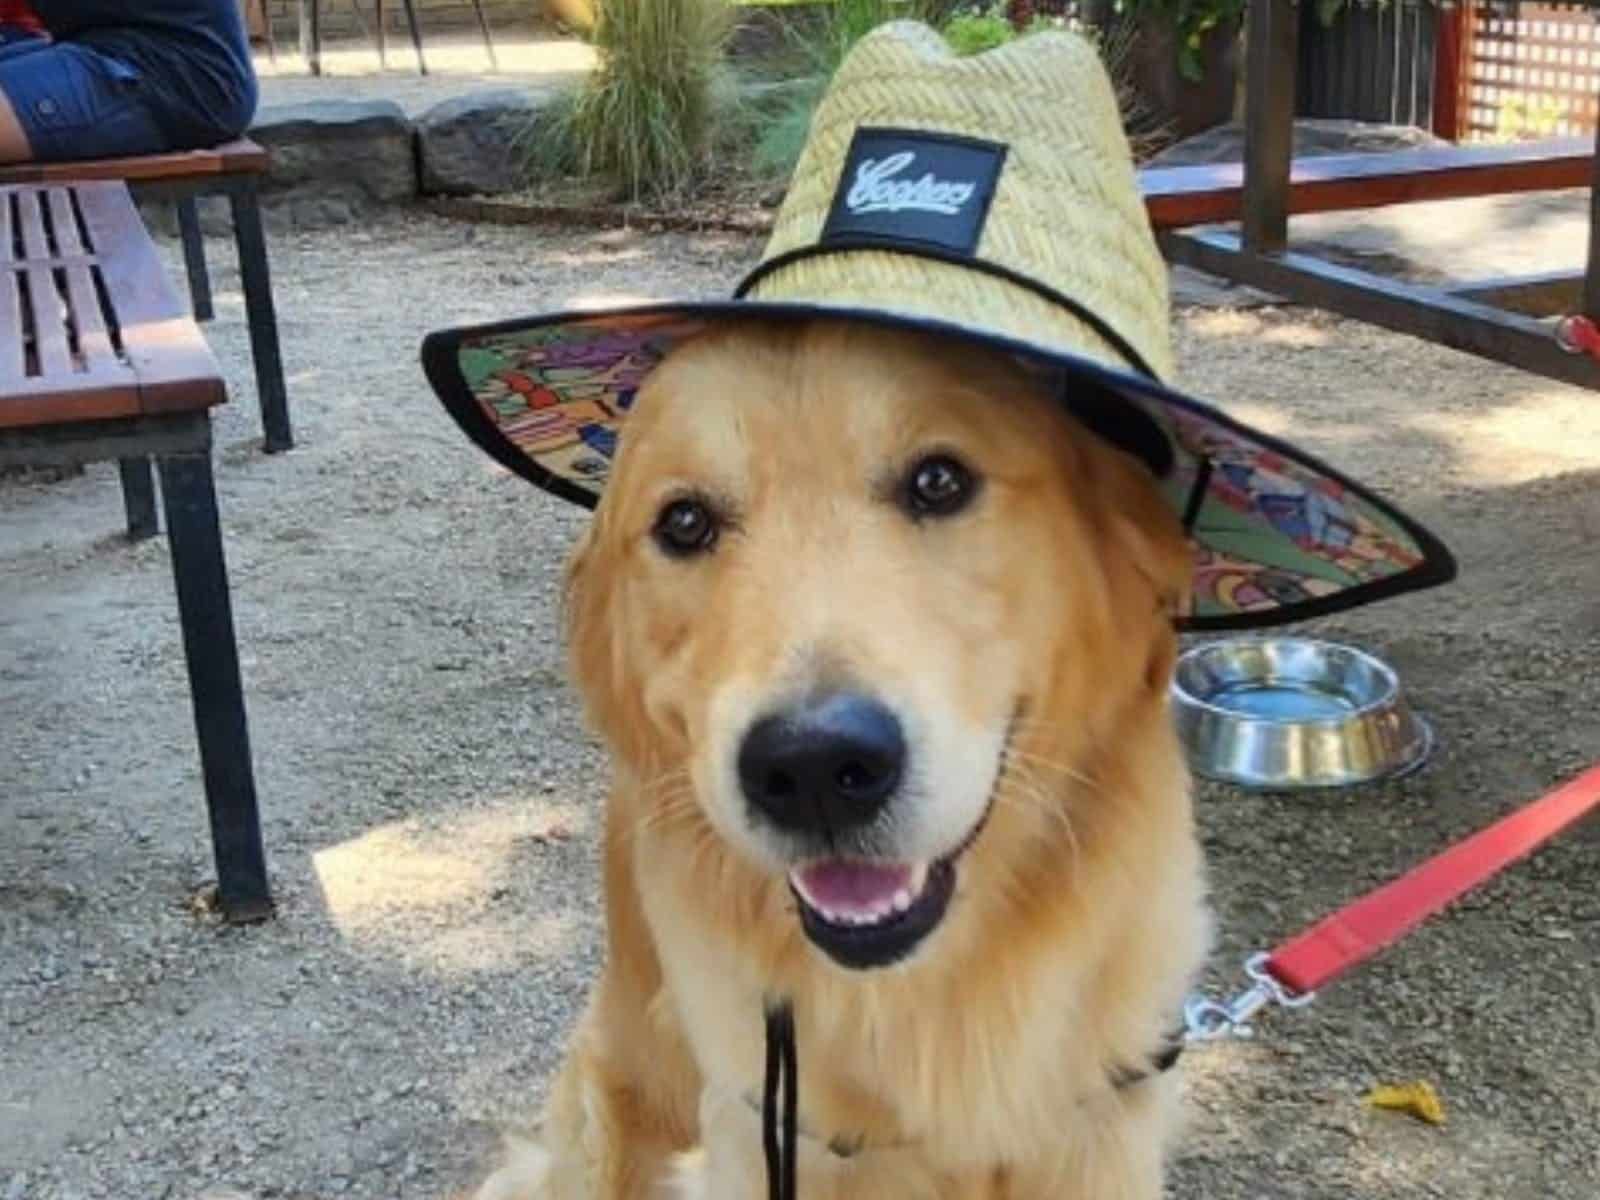 Dog in the Courtyard wearing a hat